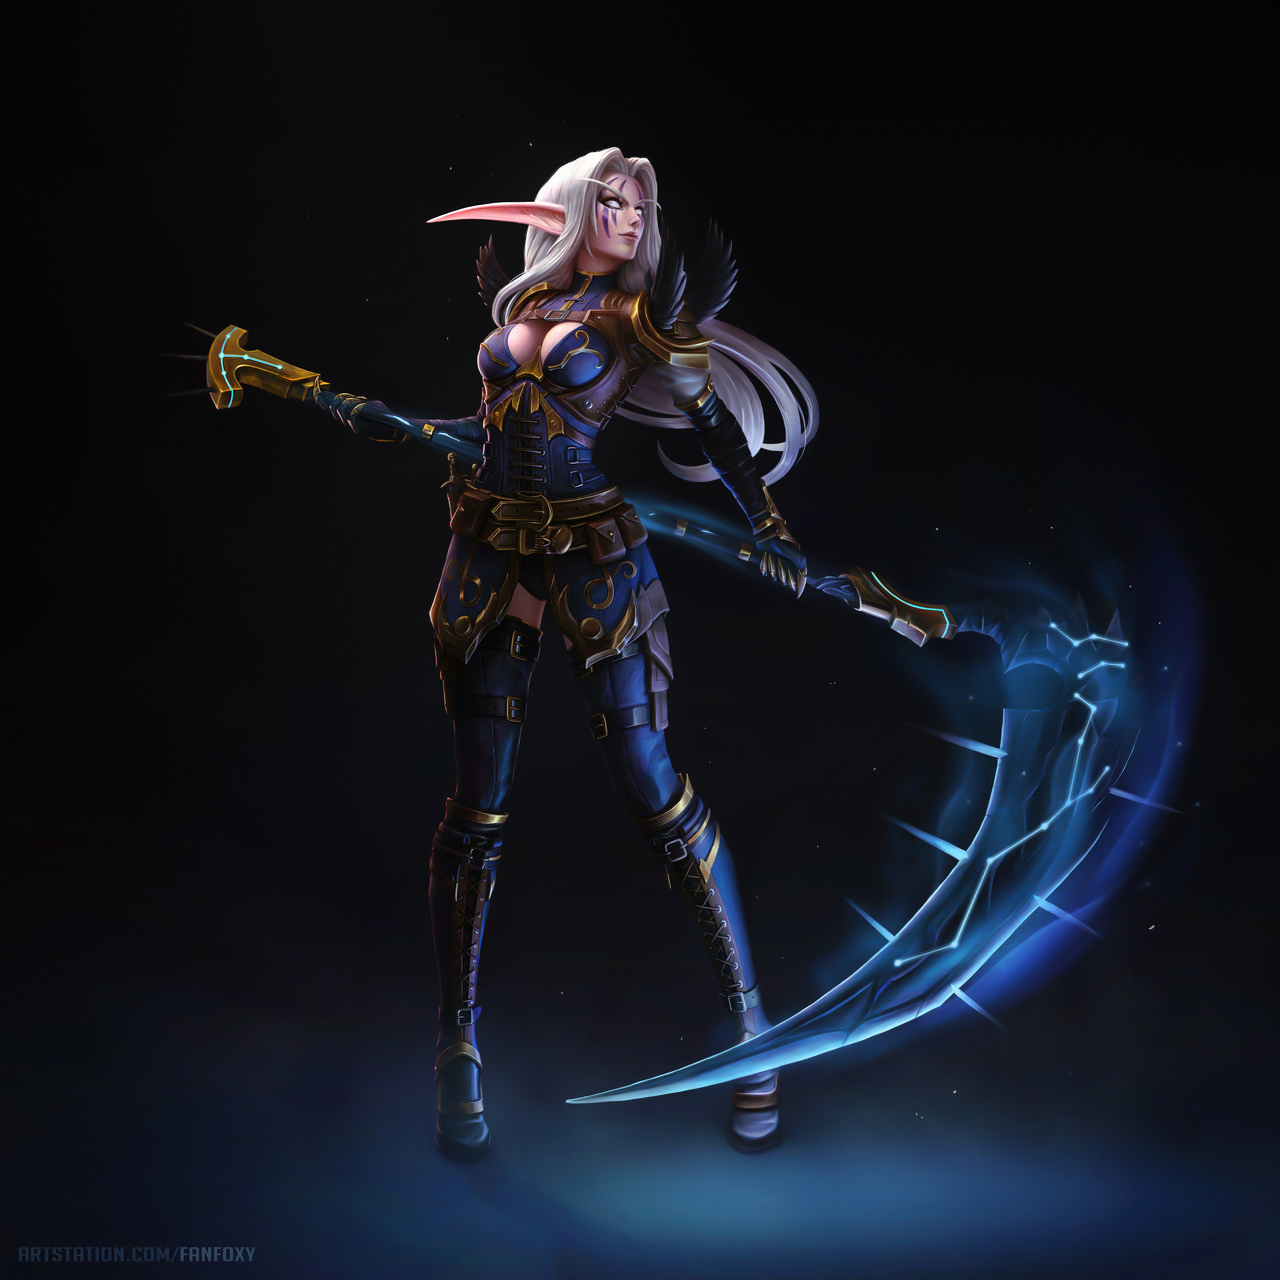 Fanfoxy Drawing Warcraft Elves Silver Hair Long Hair Pointy Ears Dress Weapon Scythe Magic Fantasy A 1280x1280